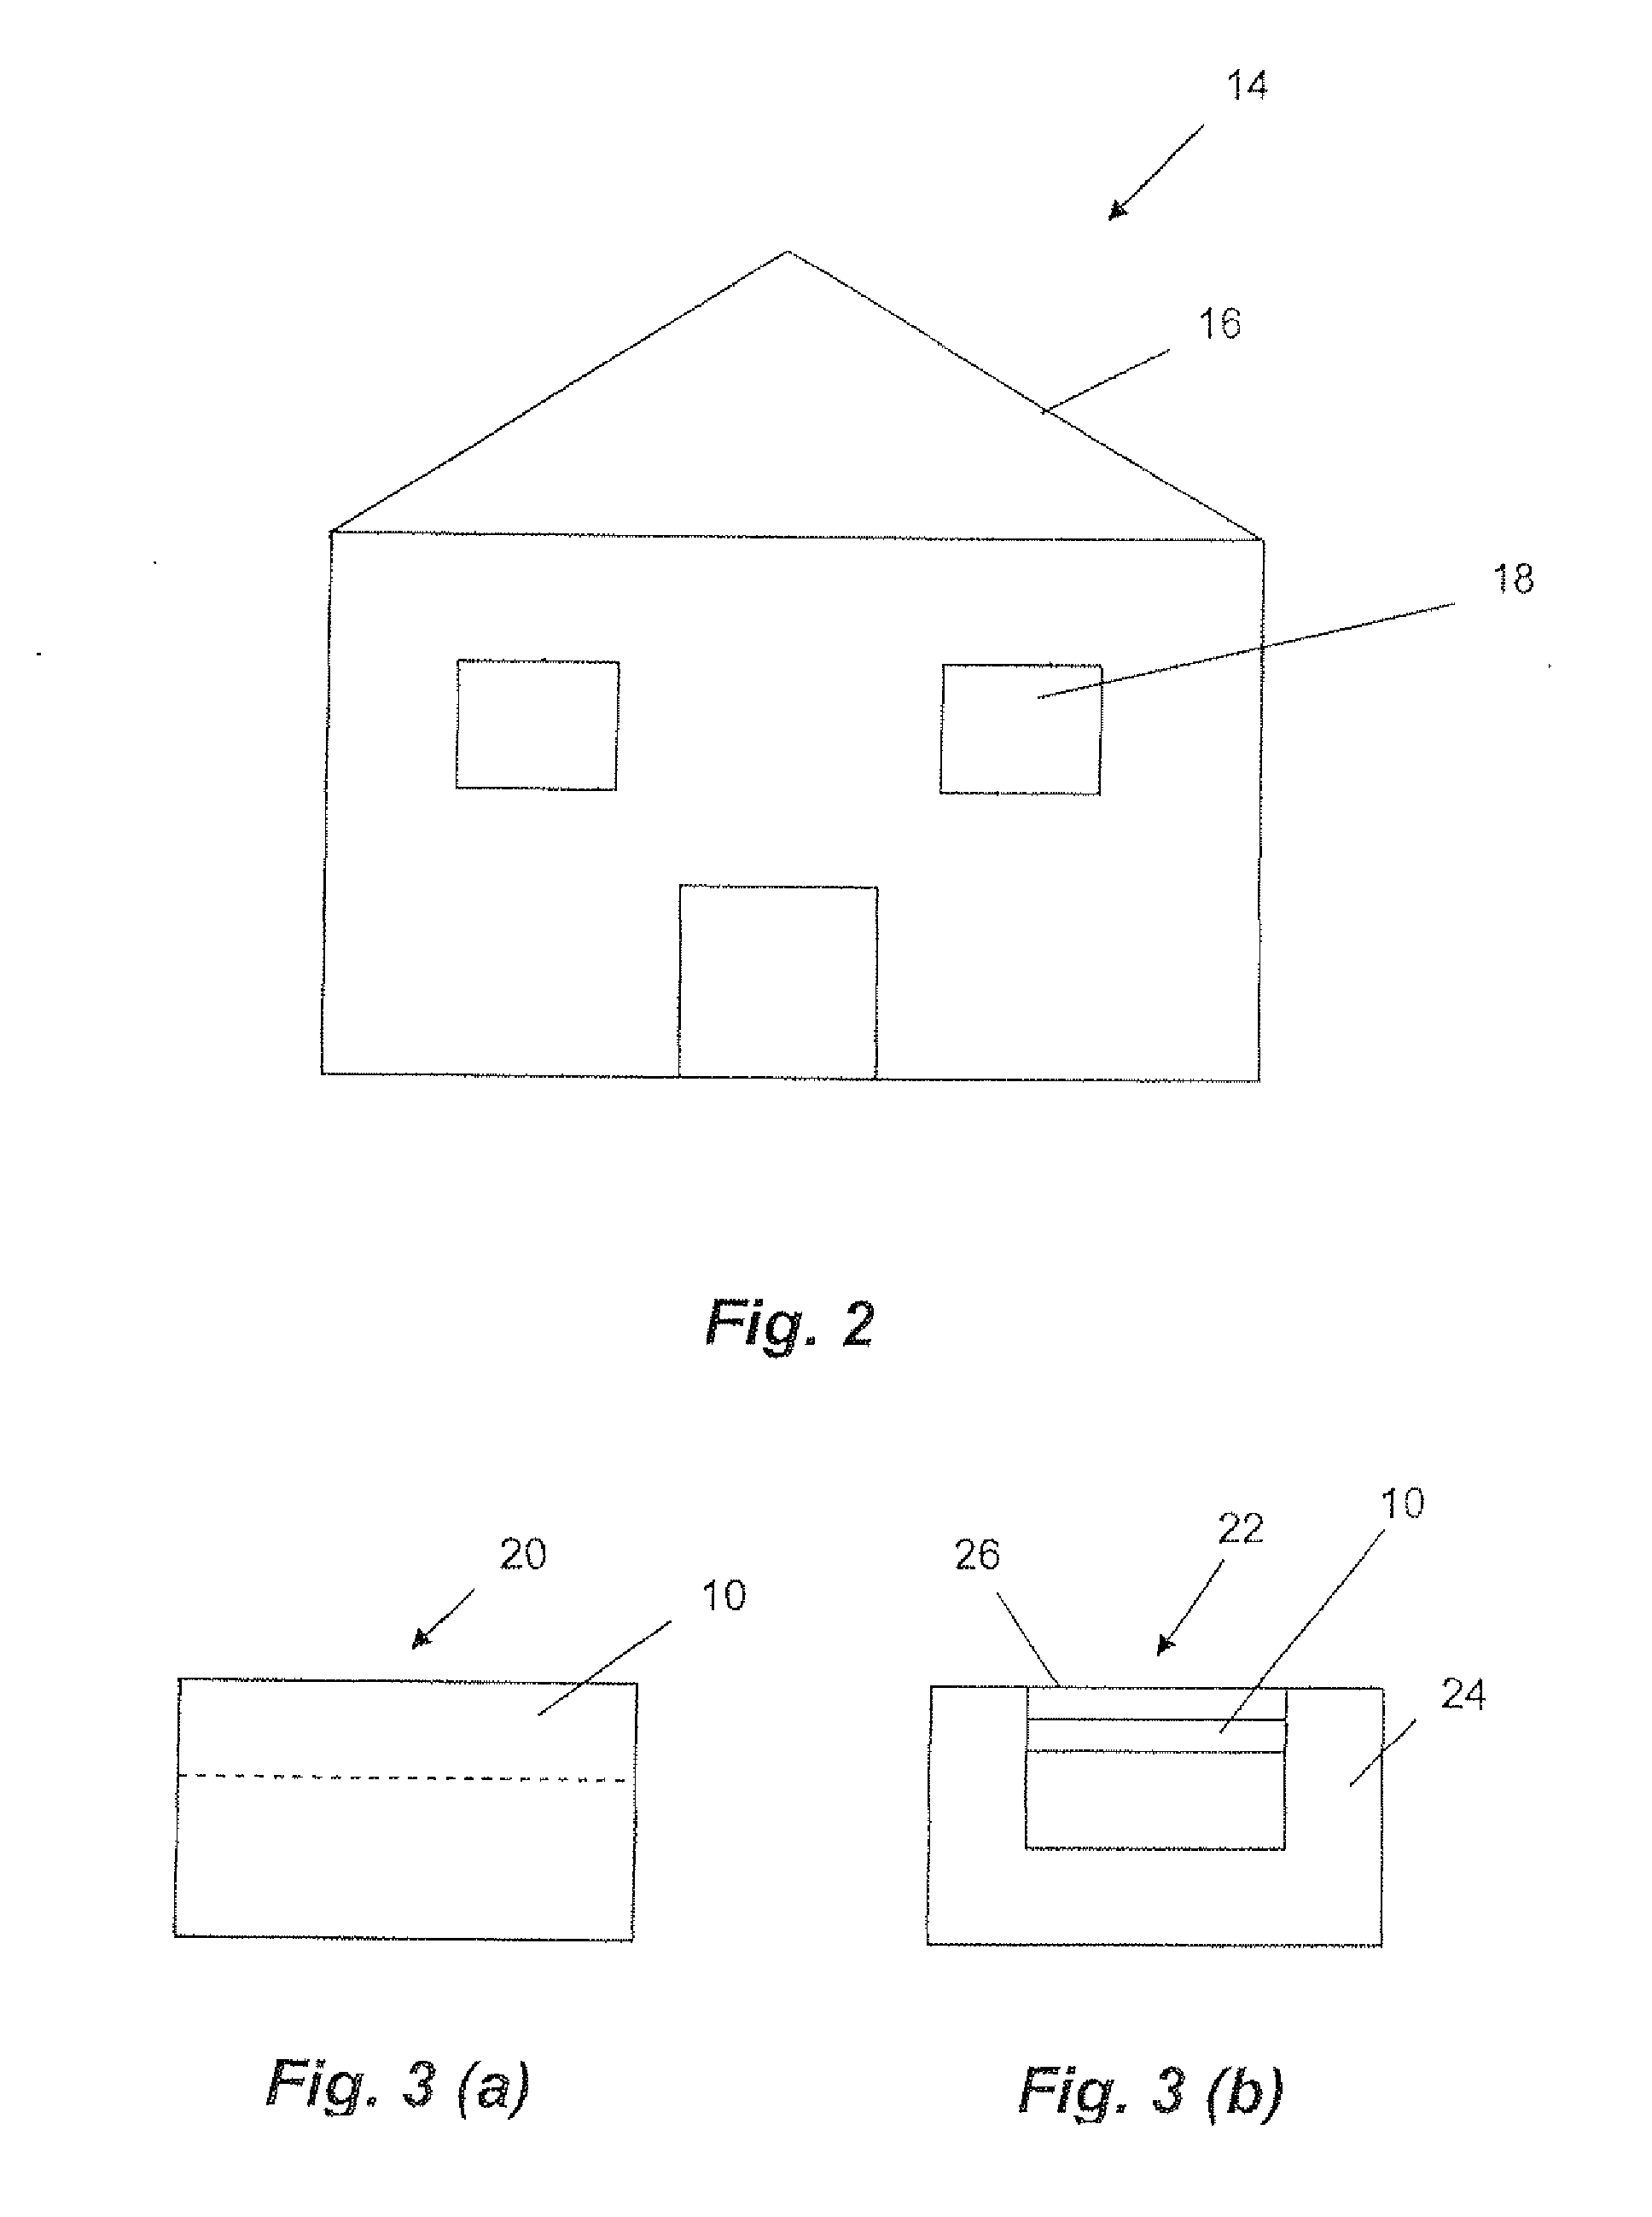 Element for emission of thermal radiation